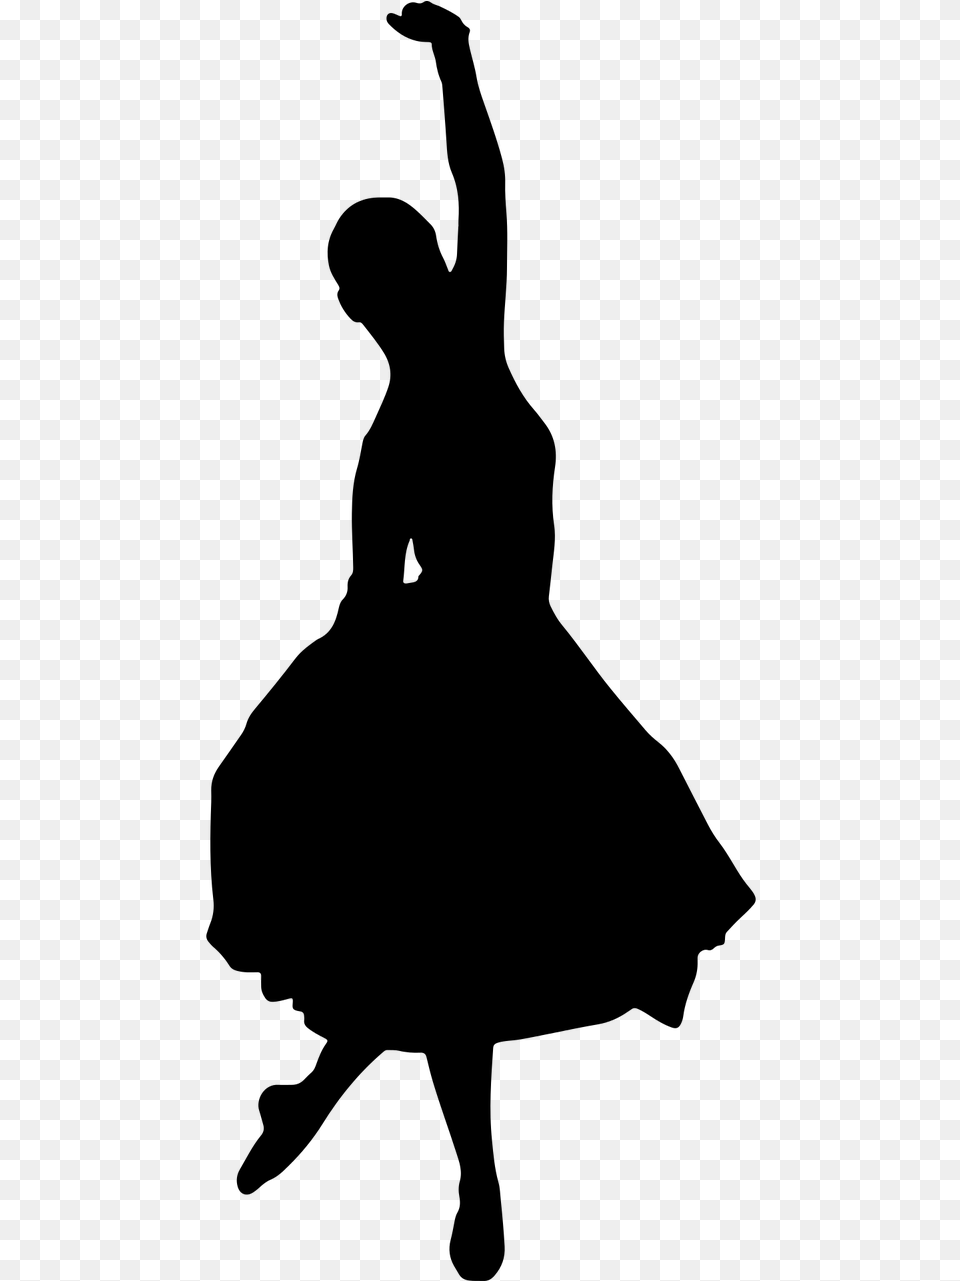 Ballroom Dancing Couple Silhouette Clipart Download Ballroom Dancing Couple Silhouette, Gray Png Image